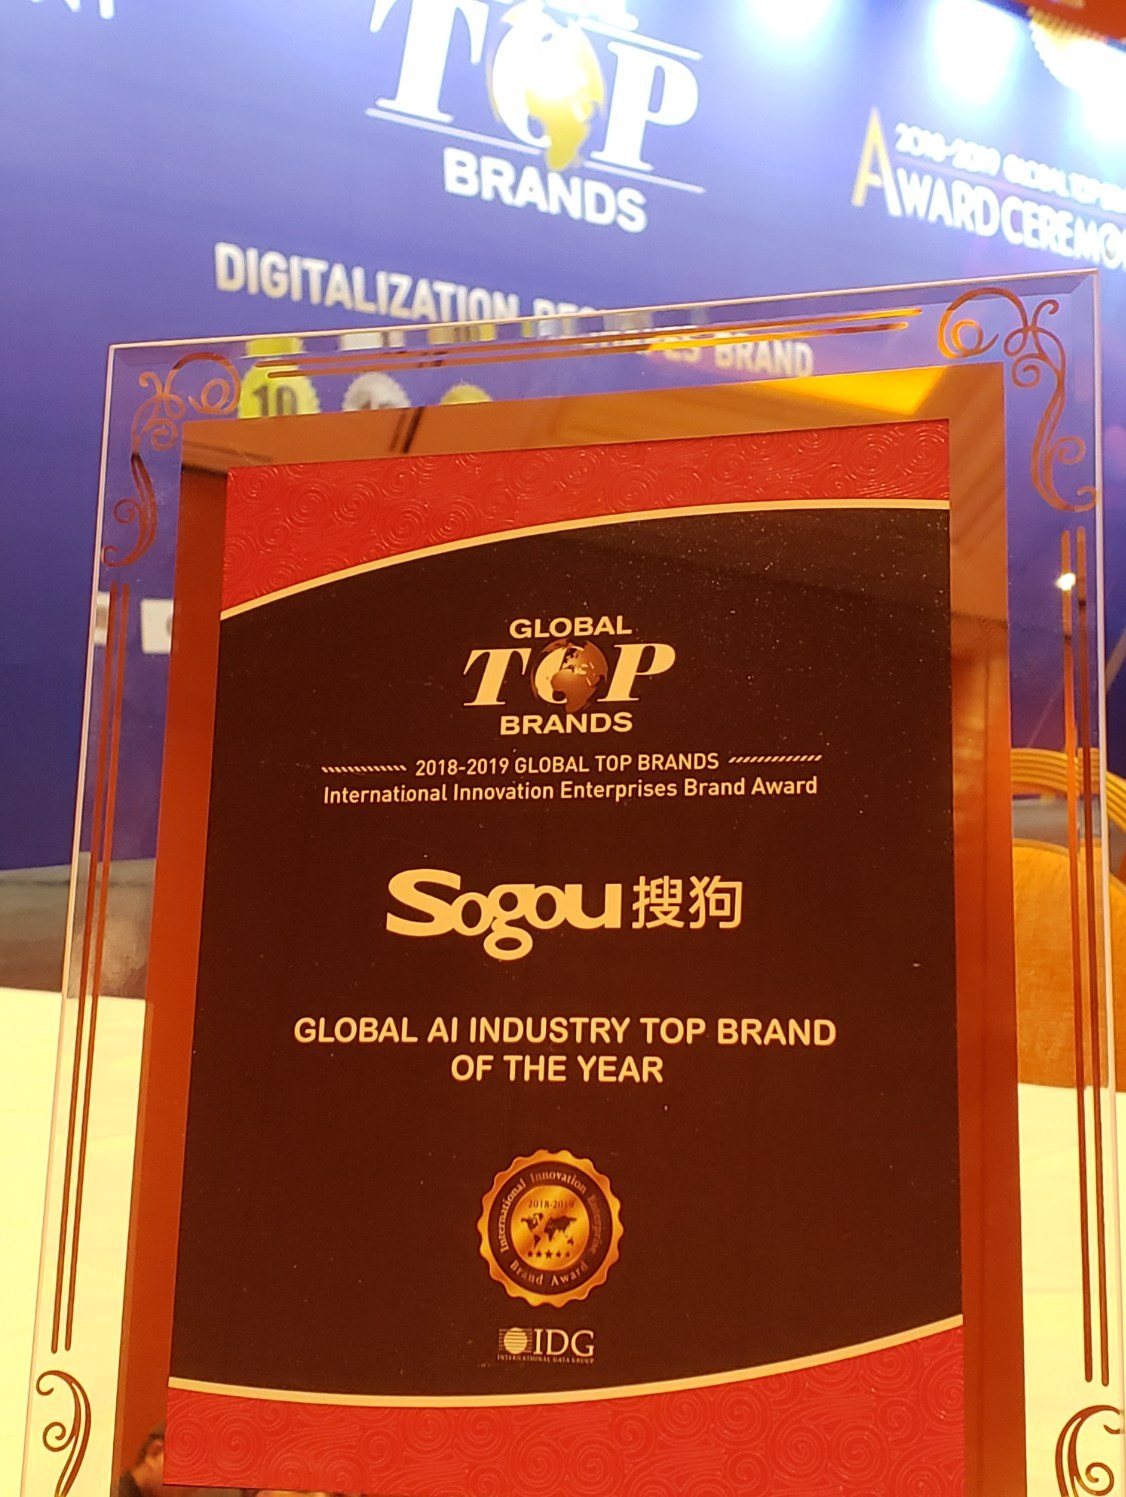 Sogou Named Global Ai Industry Top Brand Of The Year By Idg